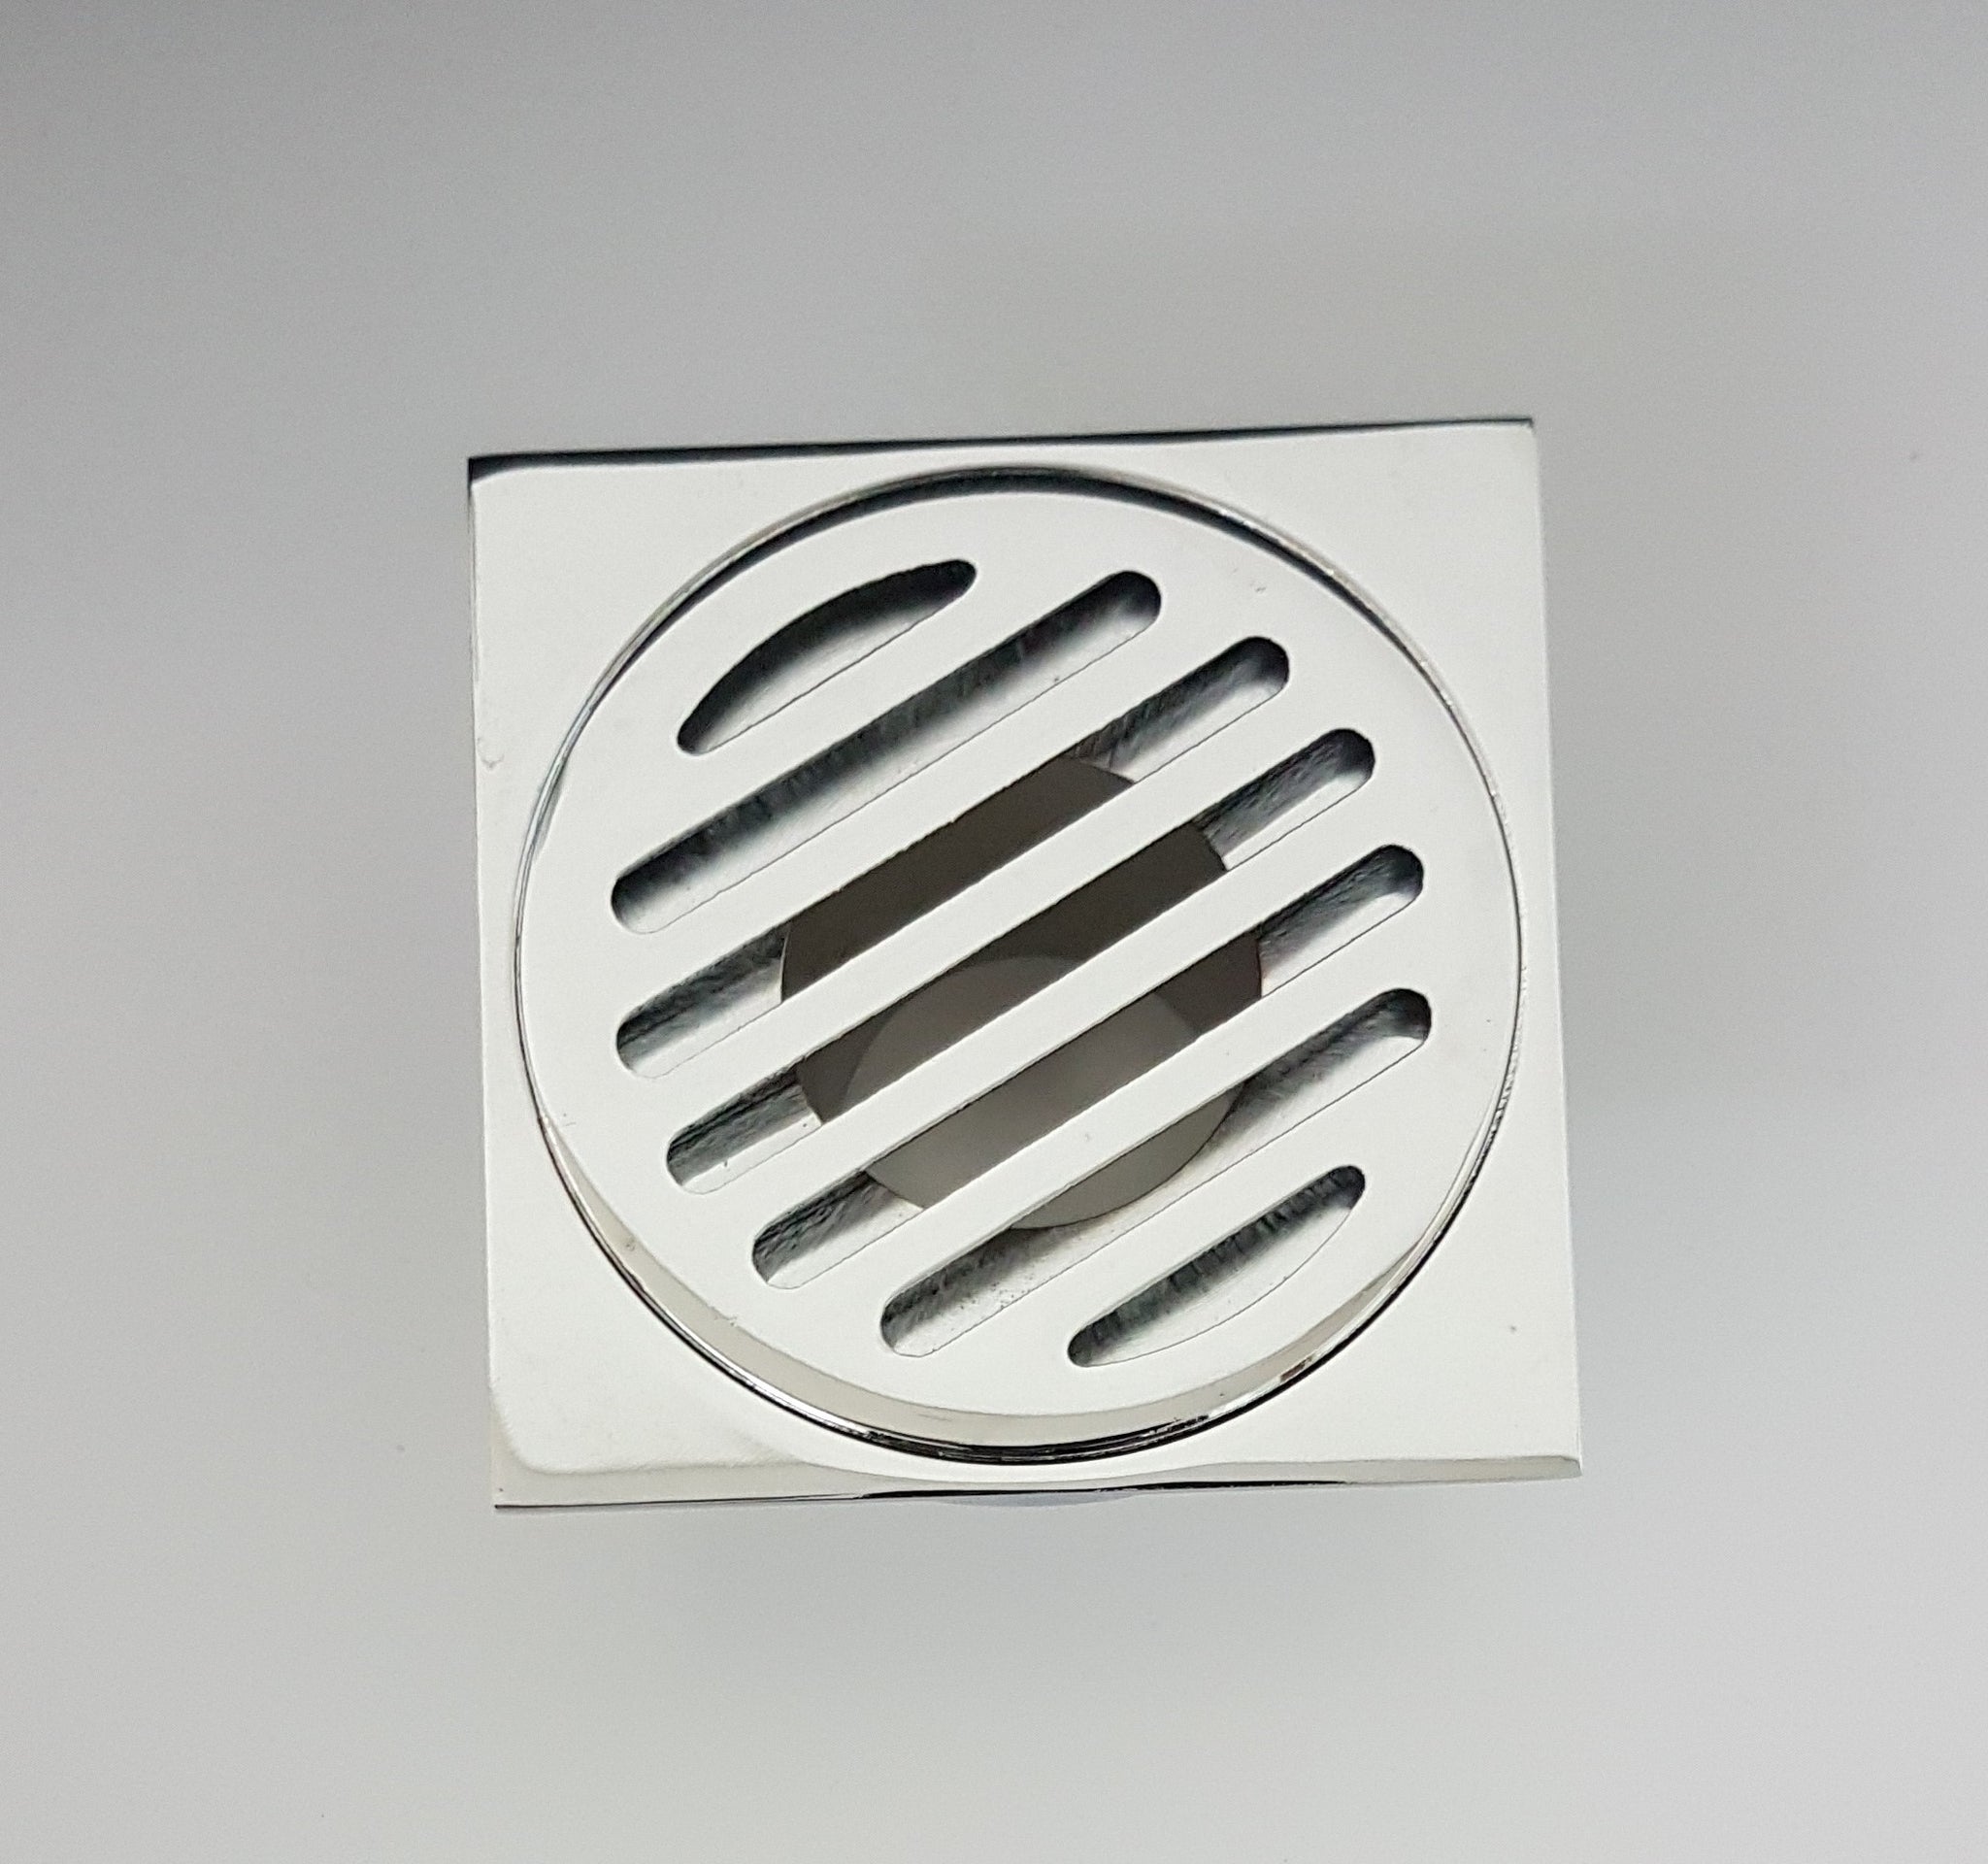 SQUARE SLOTTED FLOOR GRATE 80*40MM